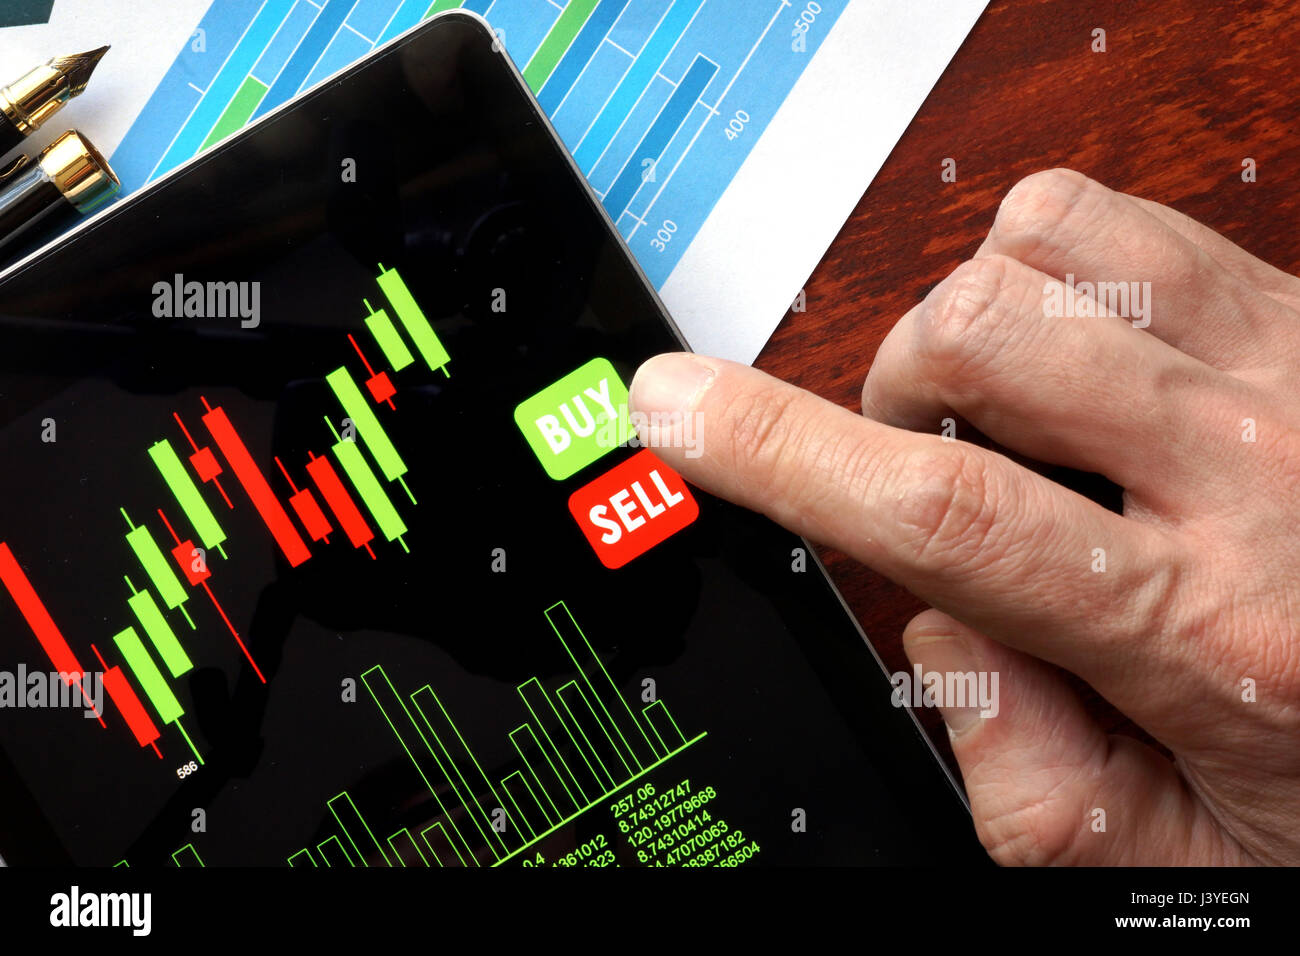 Online trading concept. Tablet with financial stock data and finger. Stock Photo